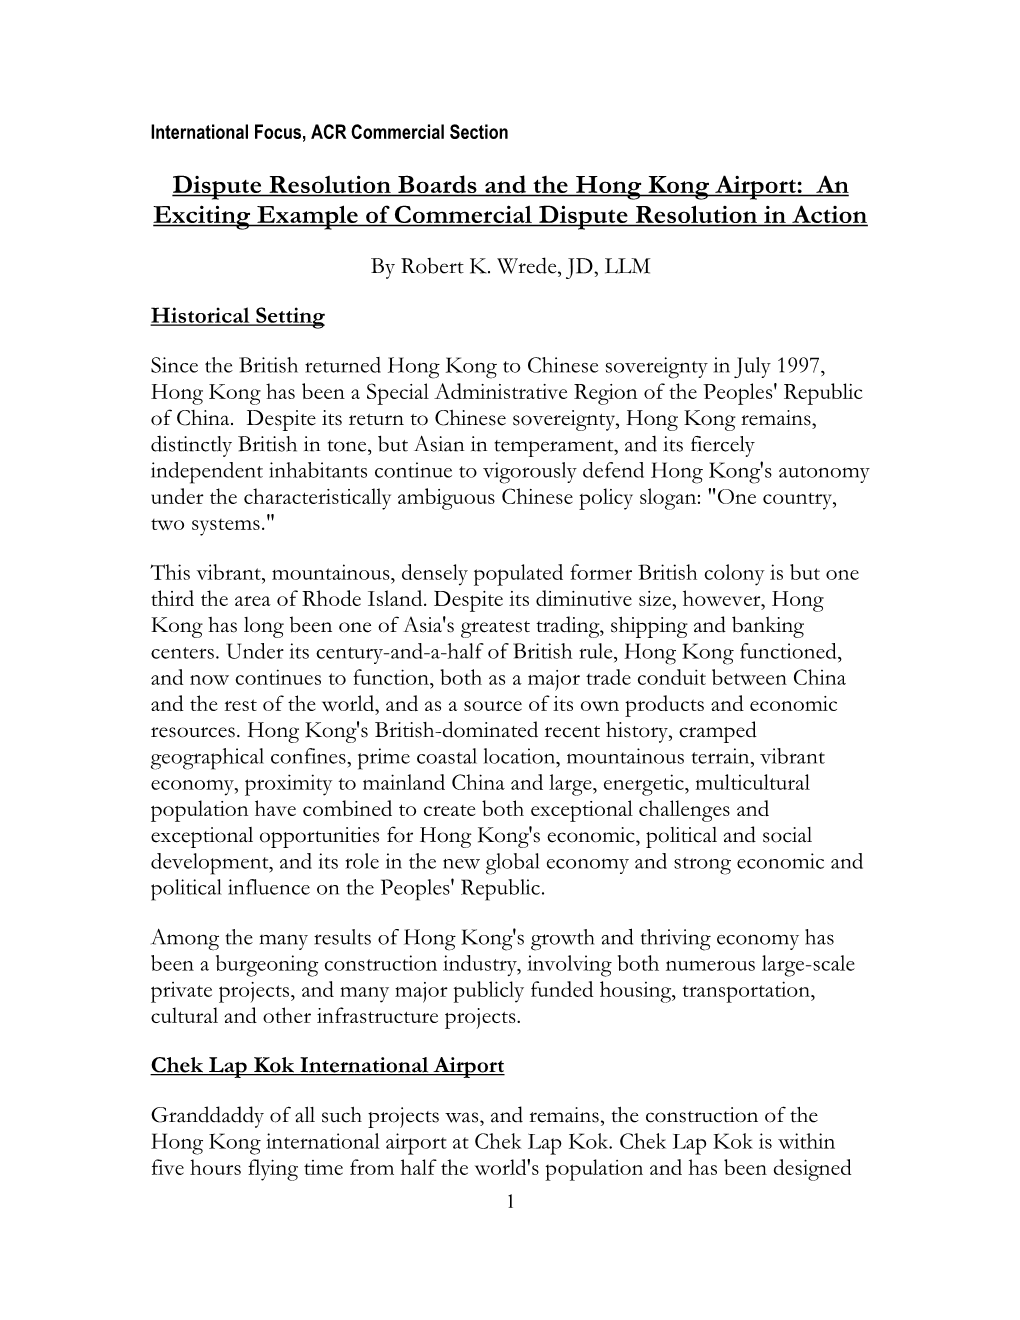 Dispute Resolution Boards and the Hong Kong Airport: an Exciting Example of Commercial Dispute Resolution in Action